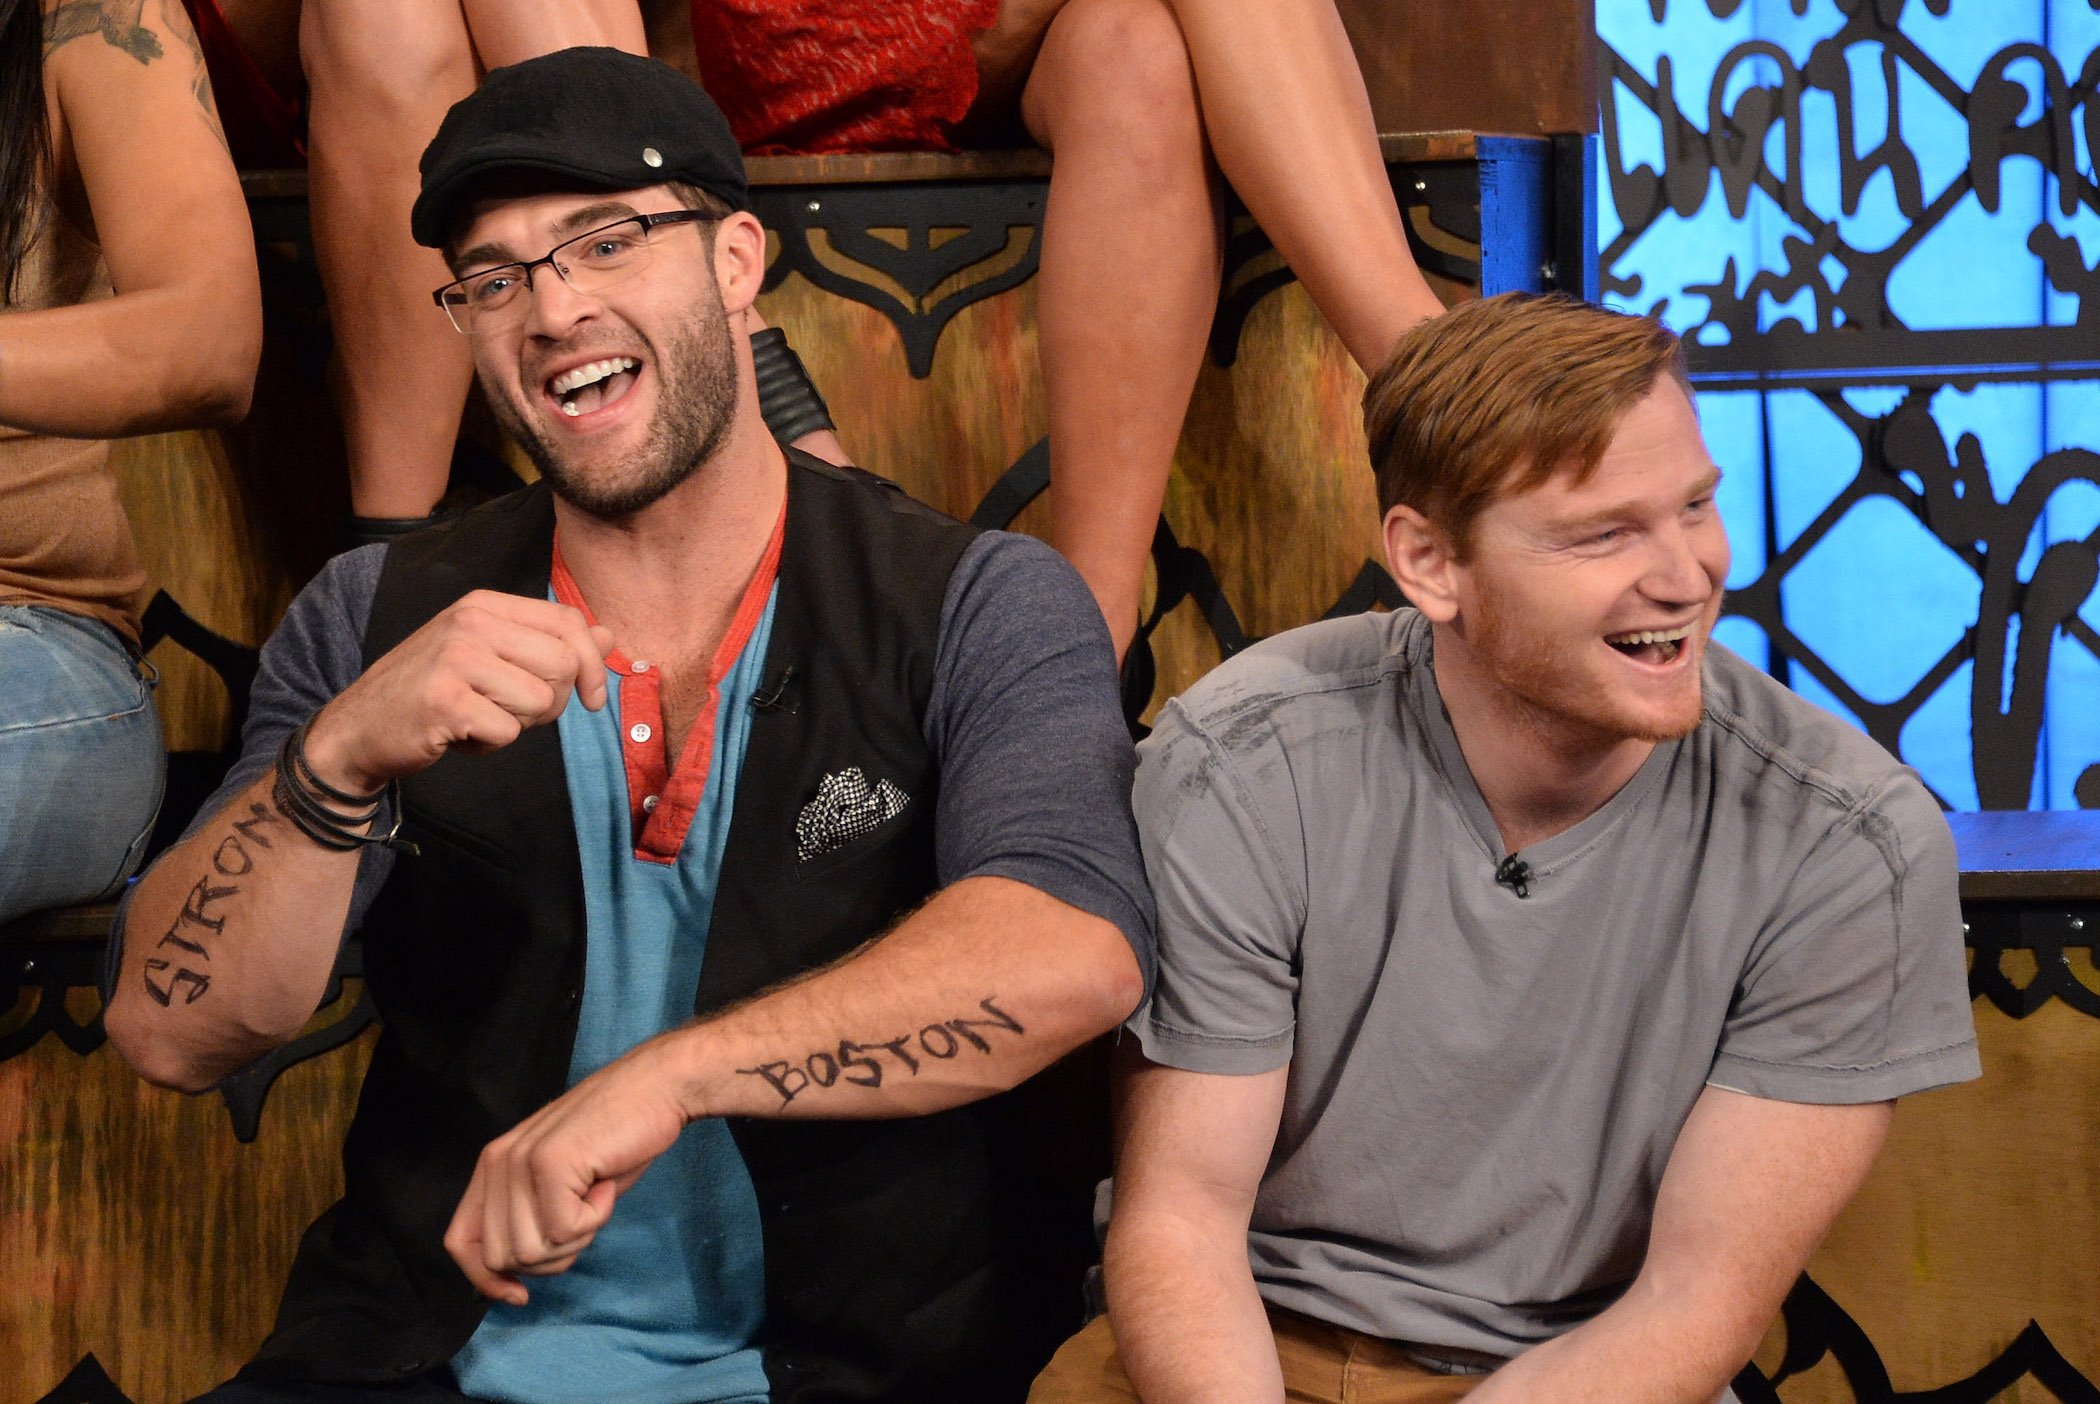 MTV's 'The Challenge' Season 37 star CT Tamburello and Wes Bergmann laughing together at 'The Challenge' reunion